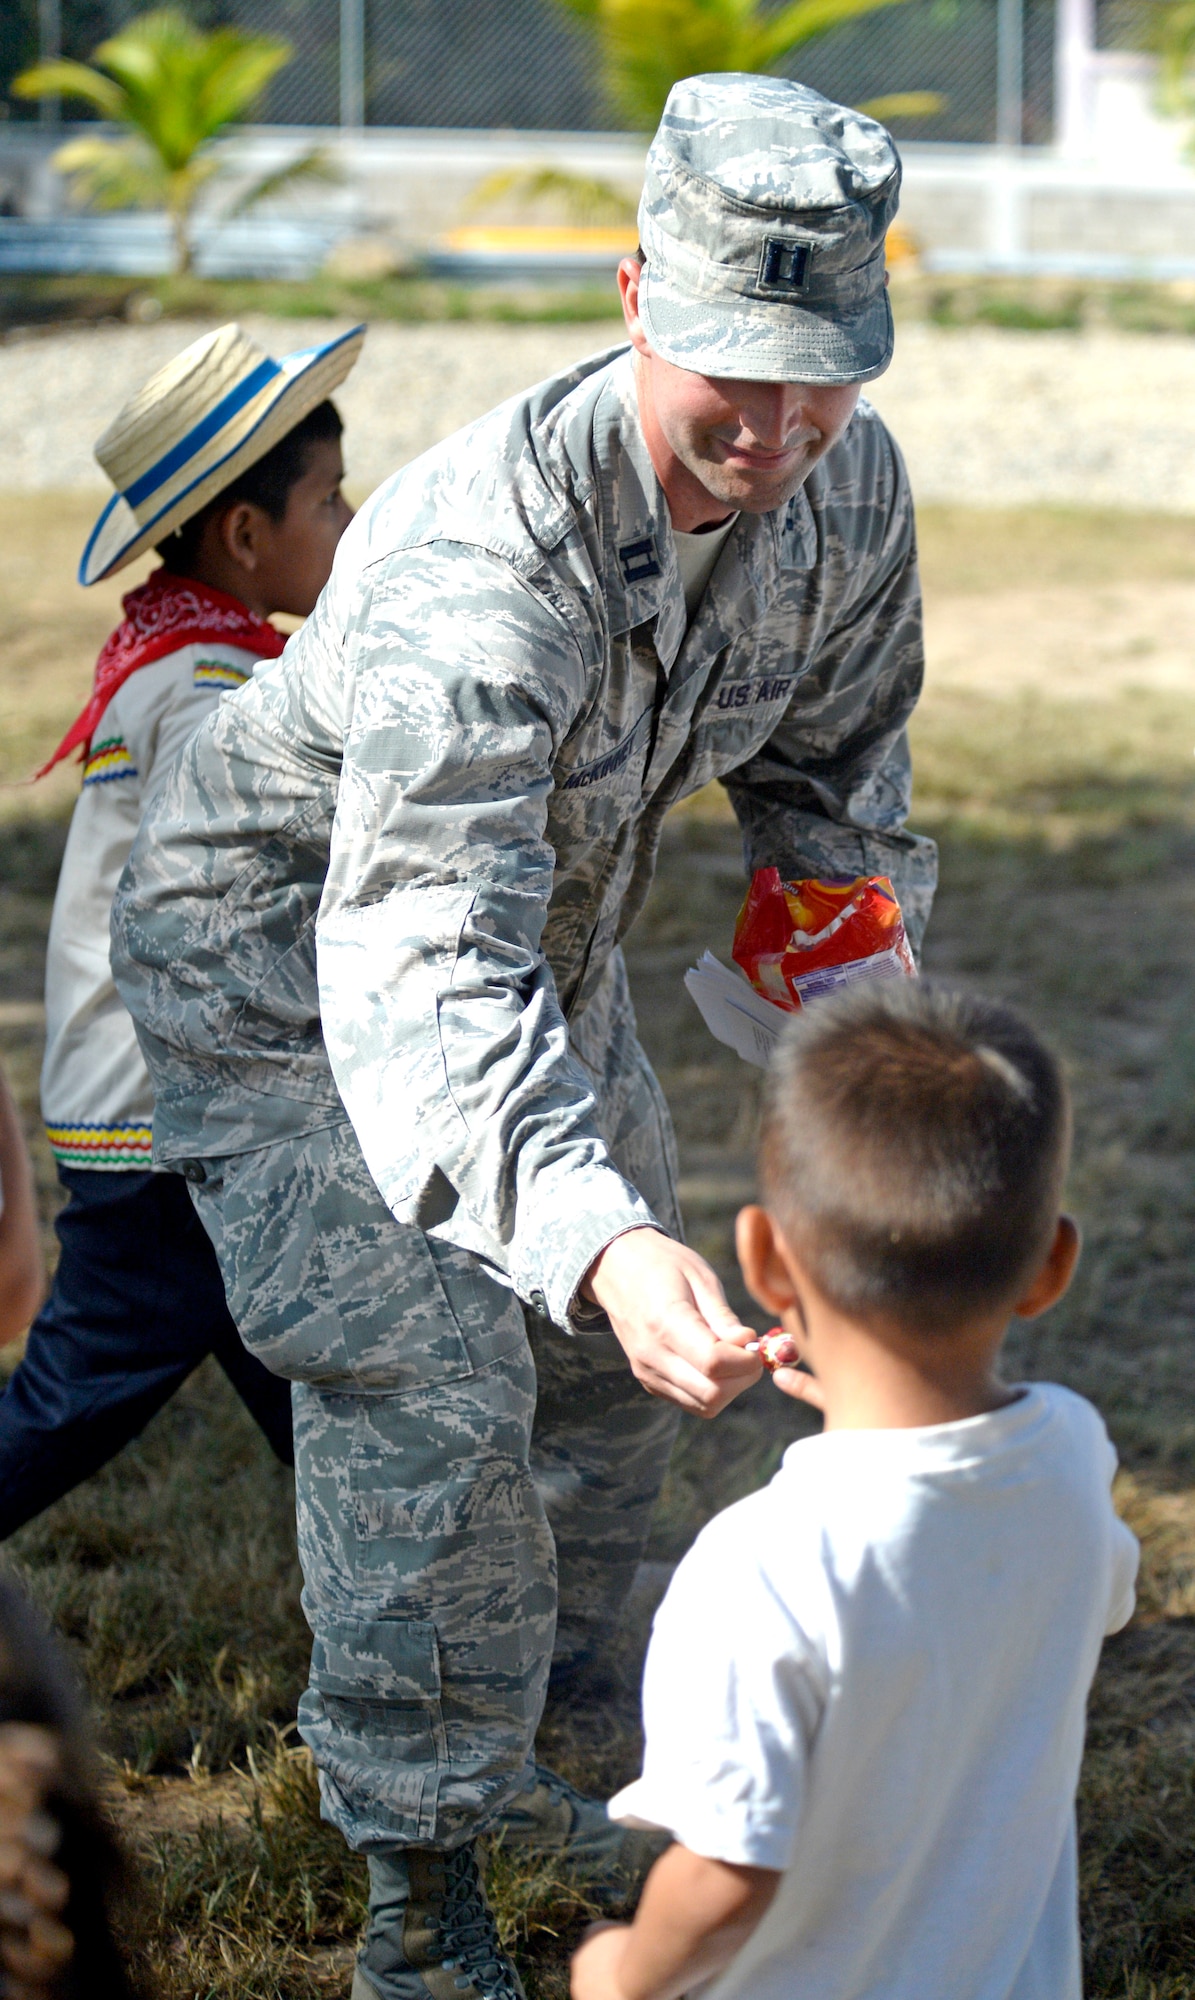 U.S. Air Force Capt. Austin McKinney, 8th Air Force Life Cycle Management Center deputy program manager out of Hanscom Air Force Base, Mass., and Canton, Mich. native, hands out candy to children following a groundbreaking ceremony at the Gabriela Mistral primary school in Ocotoes Alto, Honduras, June 1, 2015. McKinney provided translation services during the ceremony which signified the official start of the New Horizons Honduras 2015 training exercise. New Horizons was launched in the 1980s and is an annual joint humanitarian assistance exercise that U.S. Southern Command conducts with a partner nation in Central America, South America or the Caribbean. The exercise improves joint training readiness of U.S. and partner nation civil engineers, medical professionals and support personnel through humanitarian assistance activities. (U.S. Air Force photo by Capt. David J. Murphy/Released)